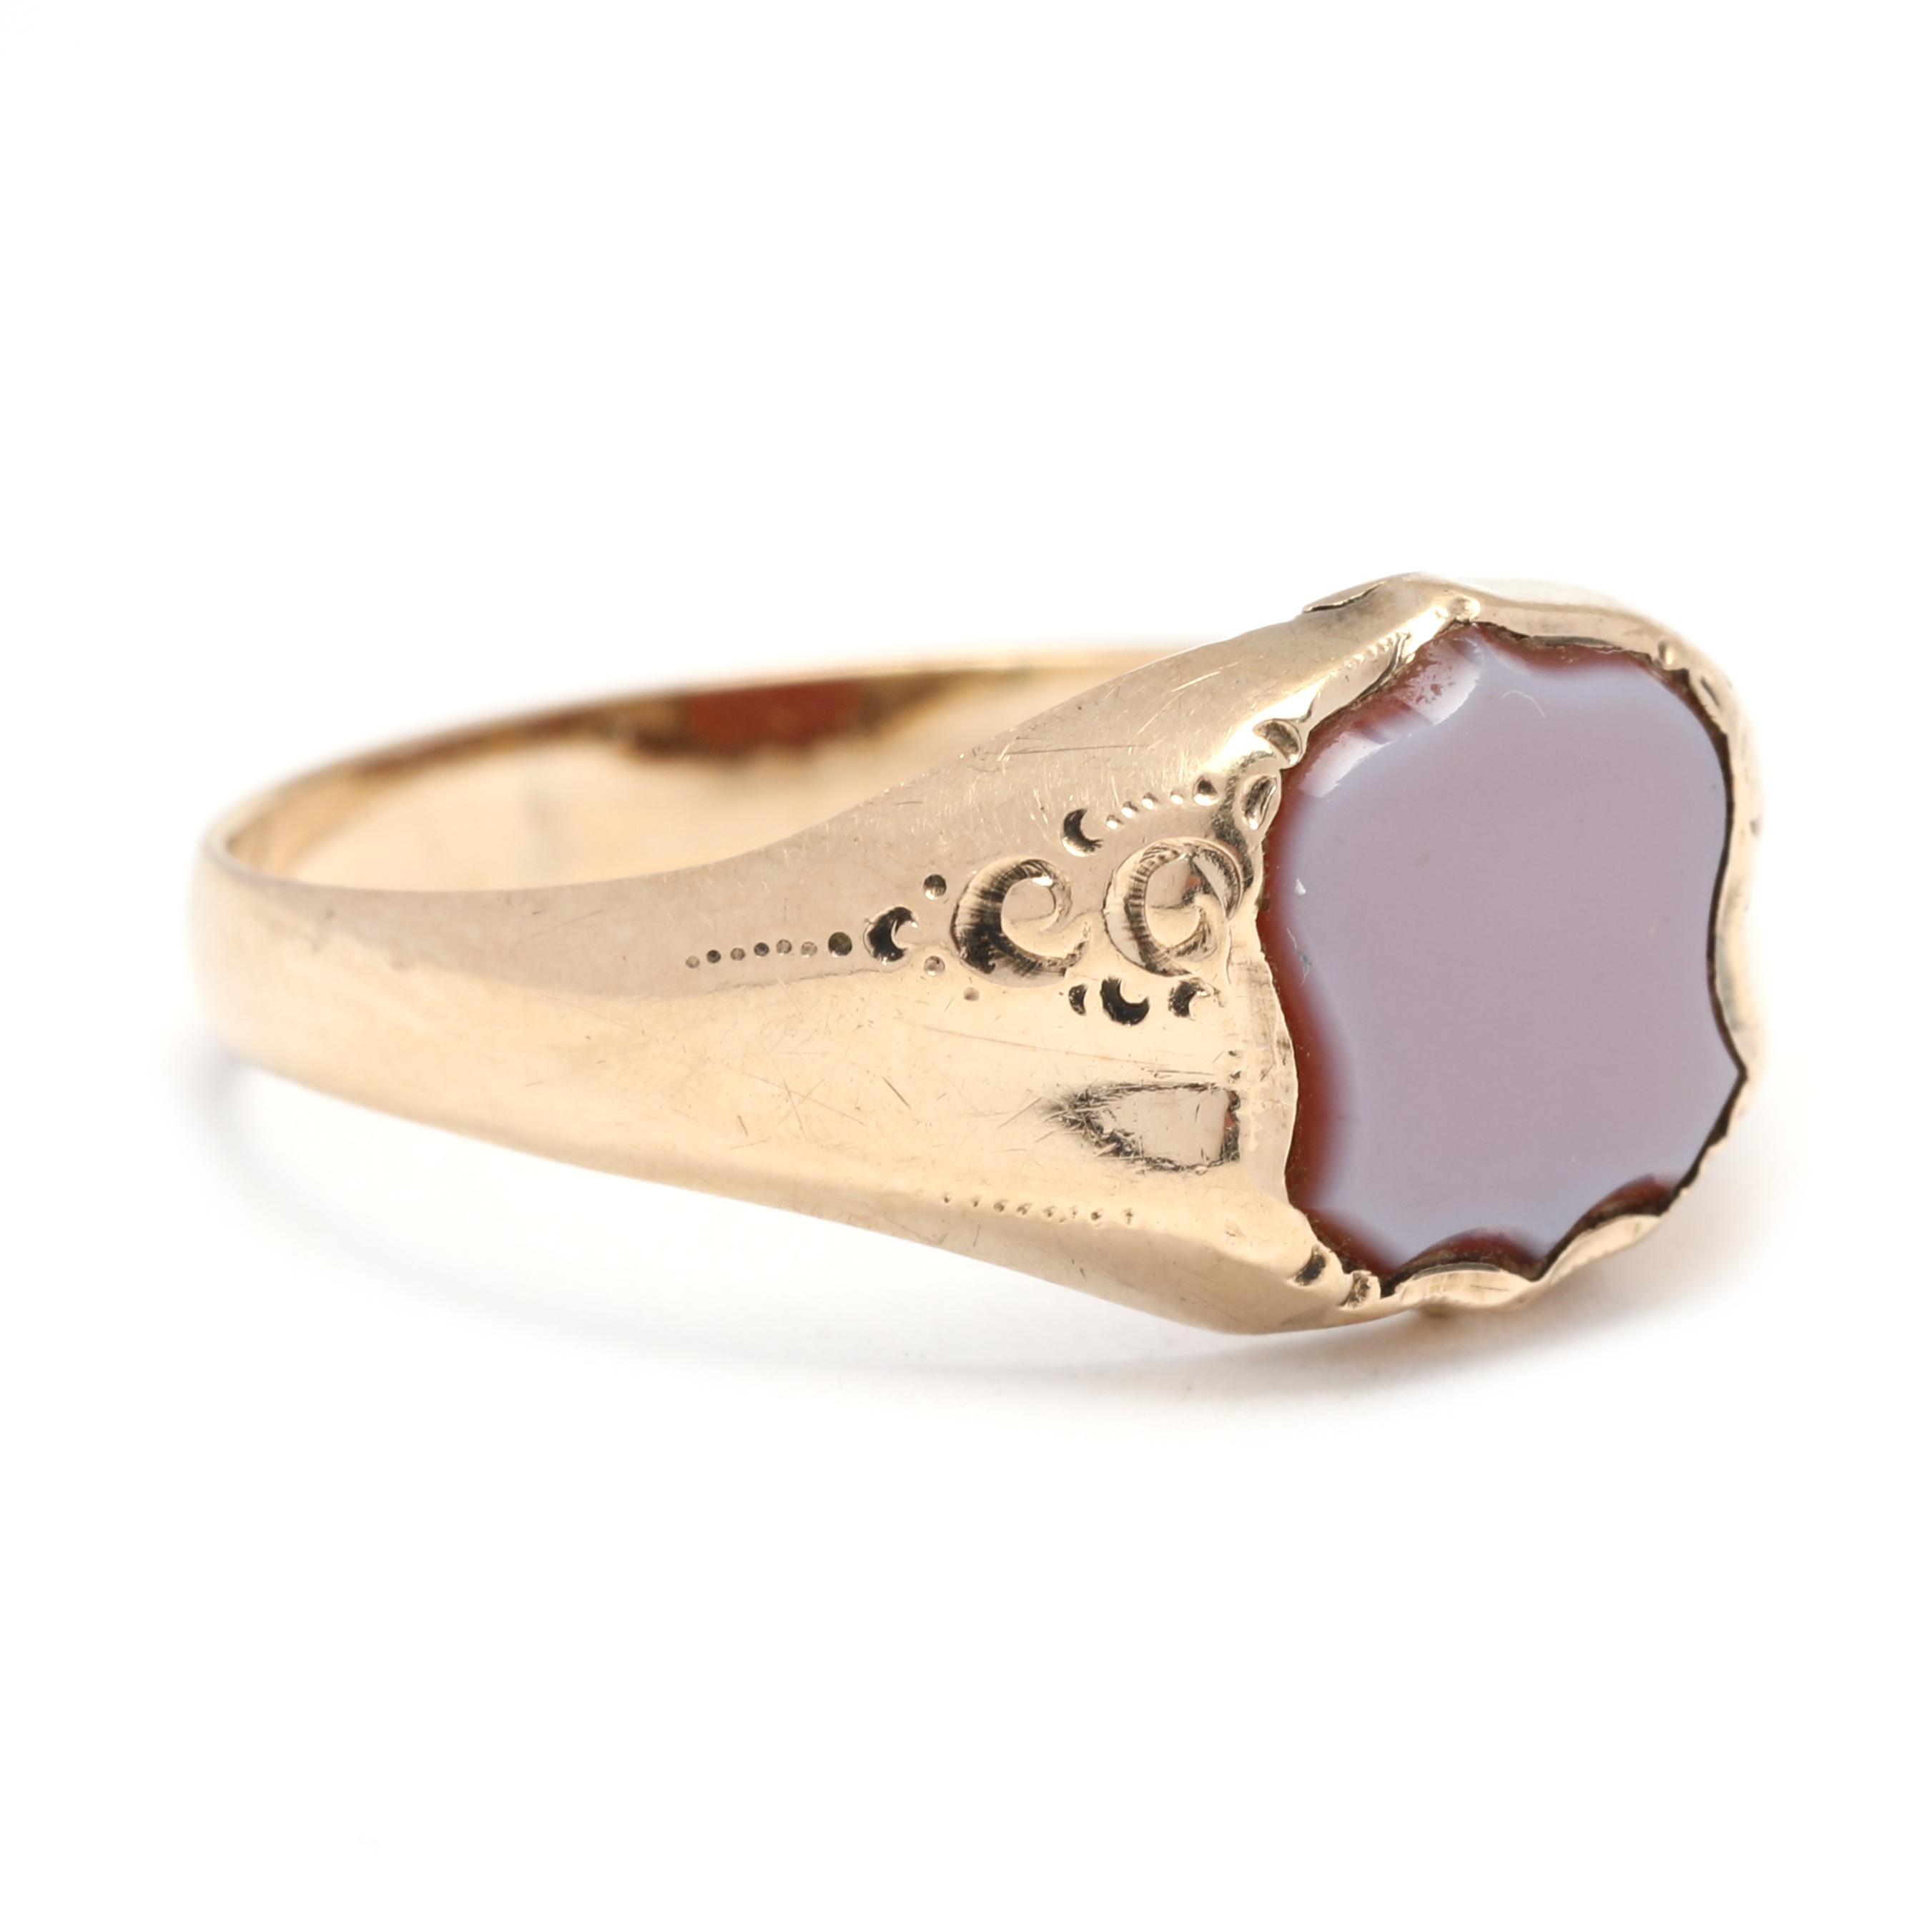 Enhance your style with this antique 14K yellow gold Sard shield signet ring. This unique and rare piece features an engraved shield design on the face of the ring, adding a touch of historical charm. The Sard gemstone, also known as carnelian, has